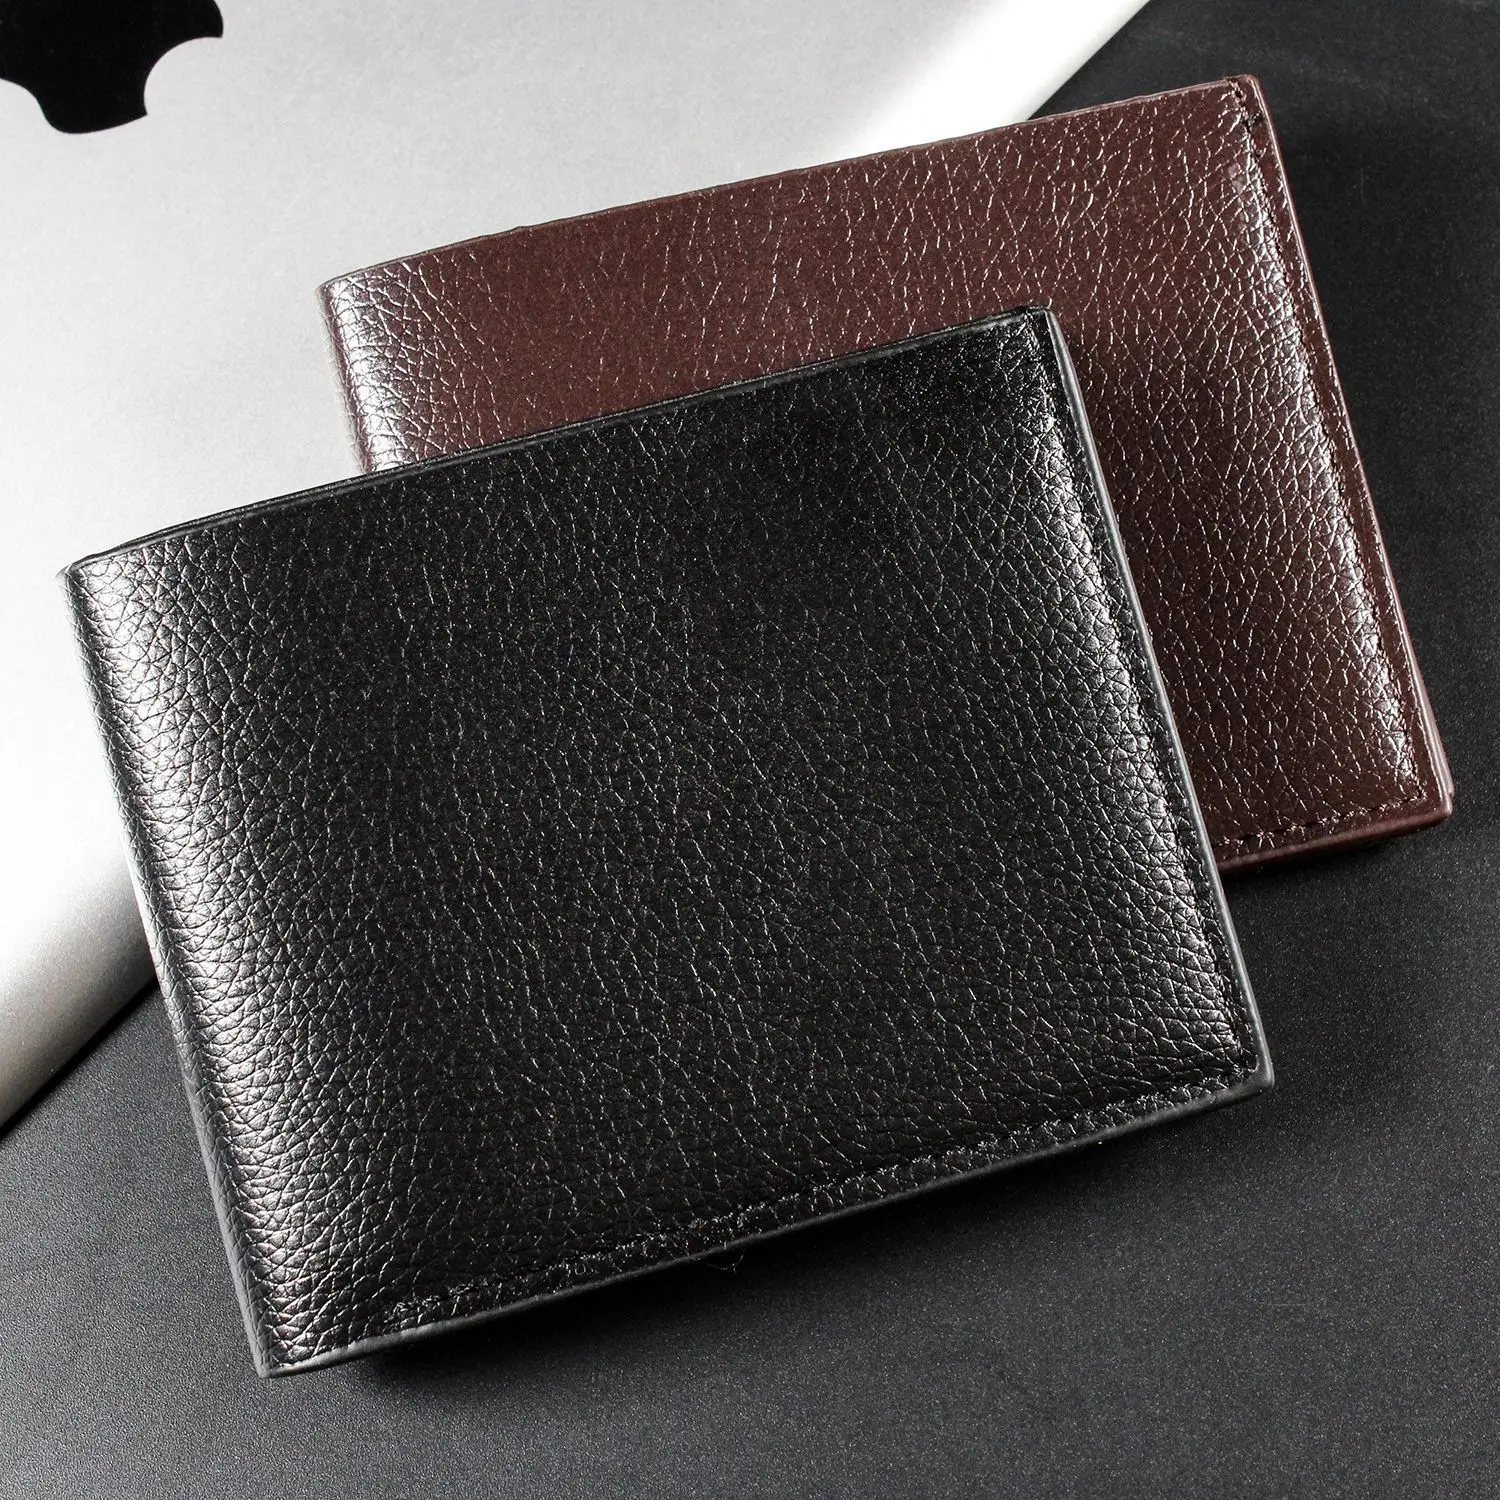 Hot Sales High Quality Soft Leather Classic Designer Man Wallet High Quality Leather Purse Men Wallets Slim